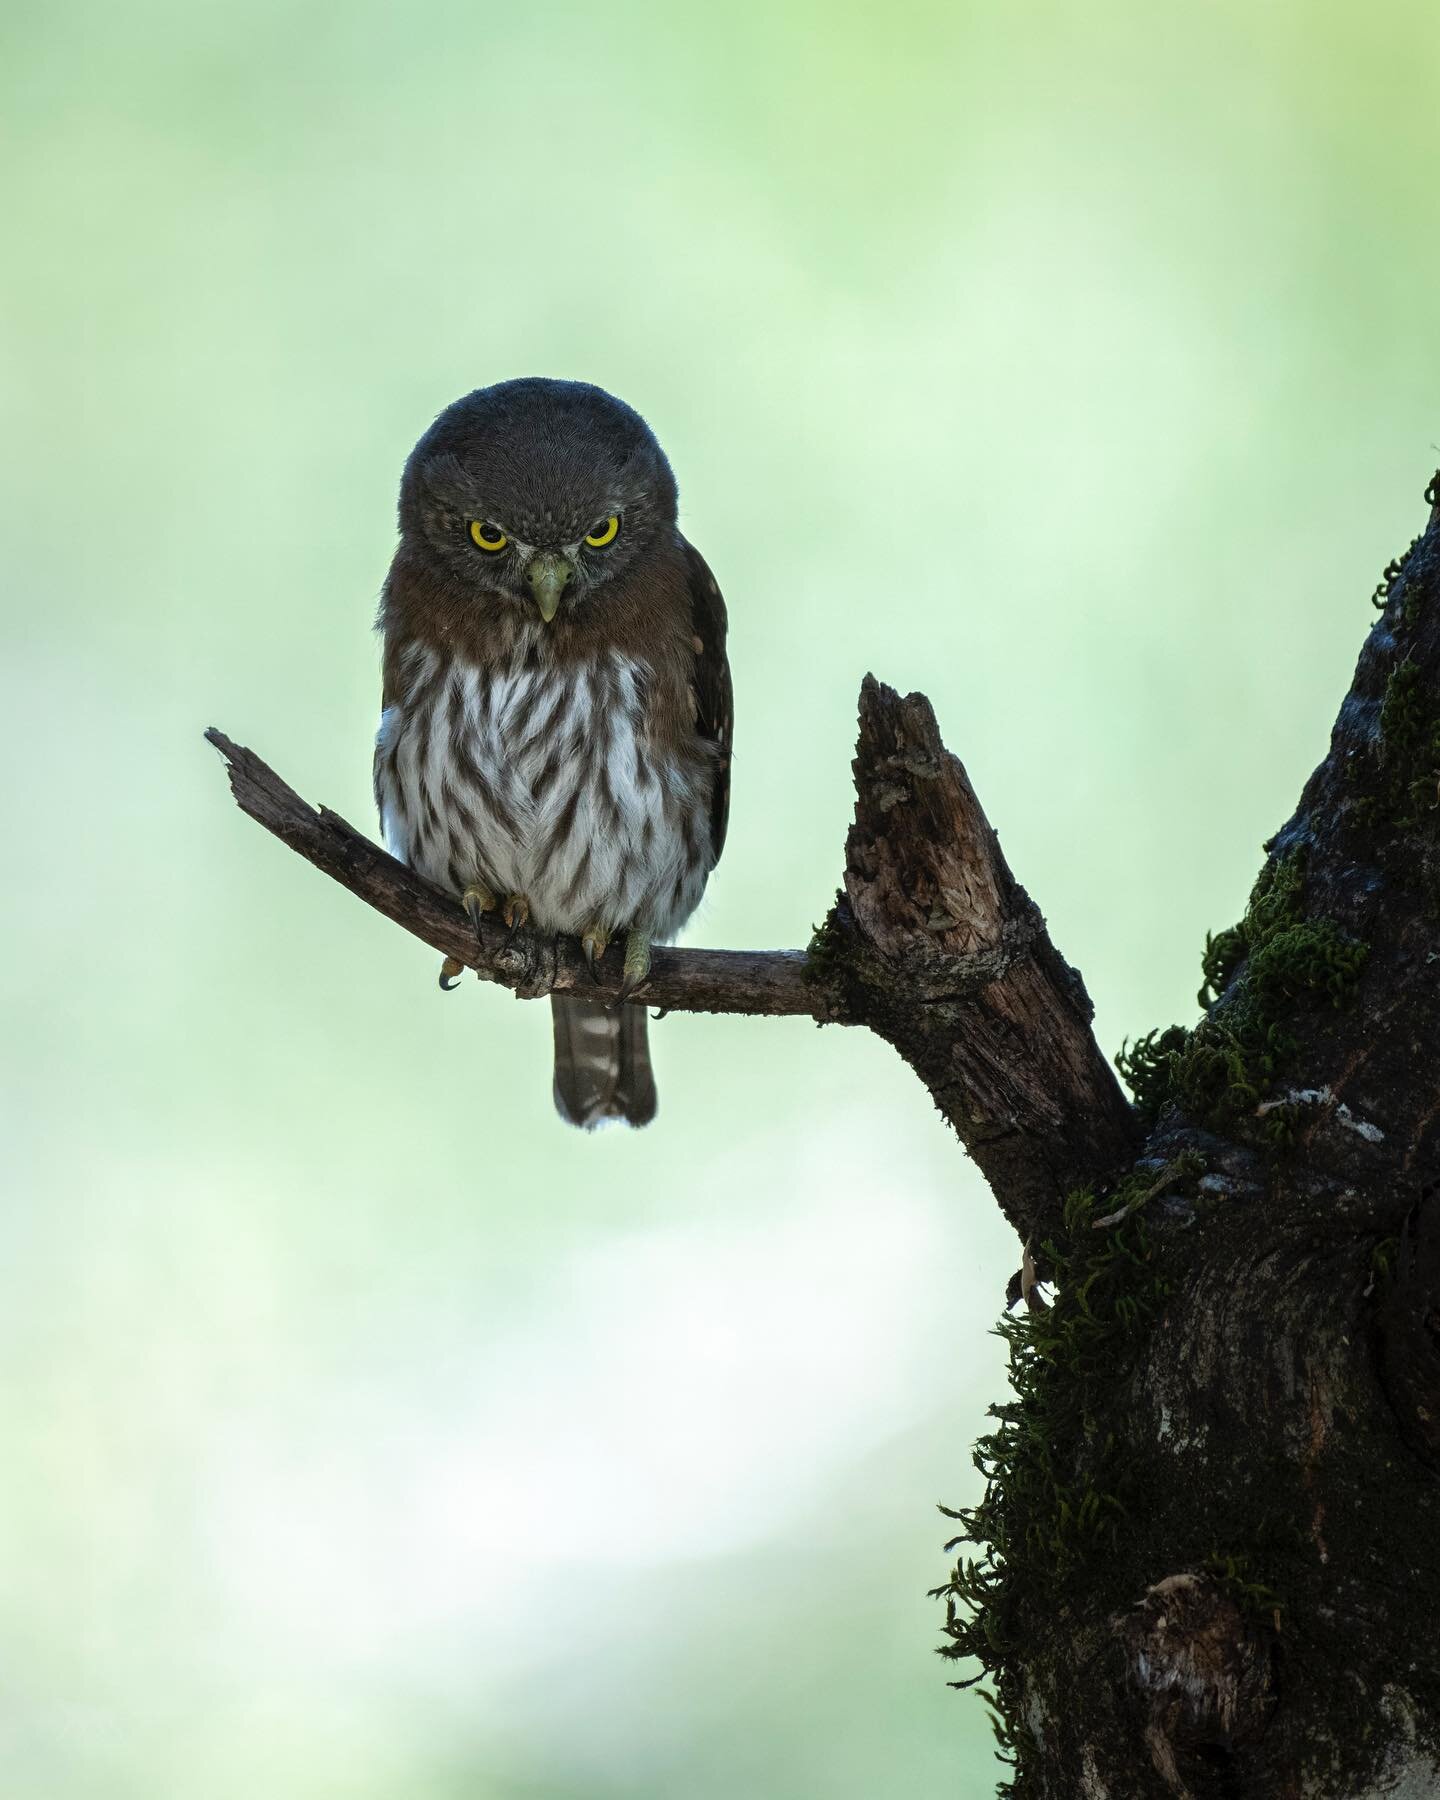 A pygmy owl employs its sharp vision to scan the ground for prey.